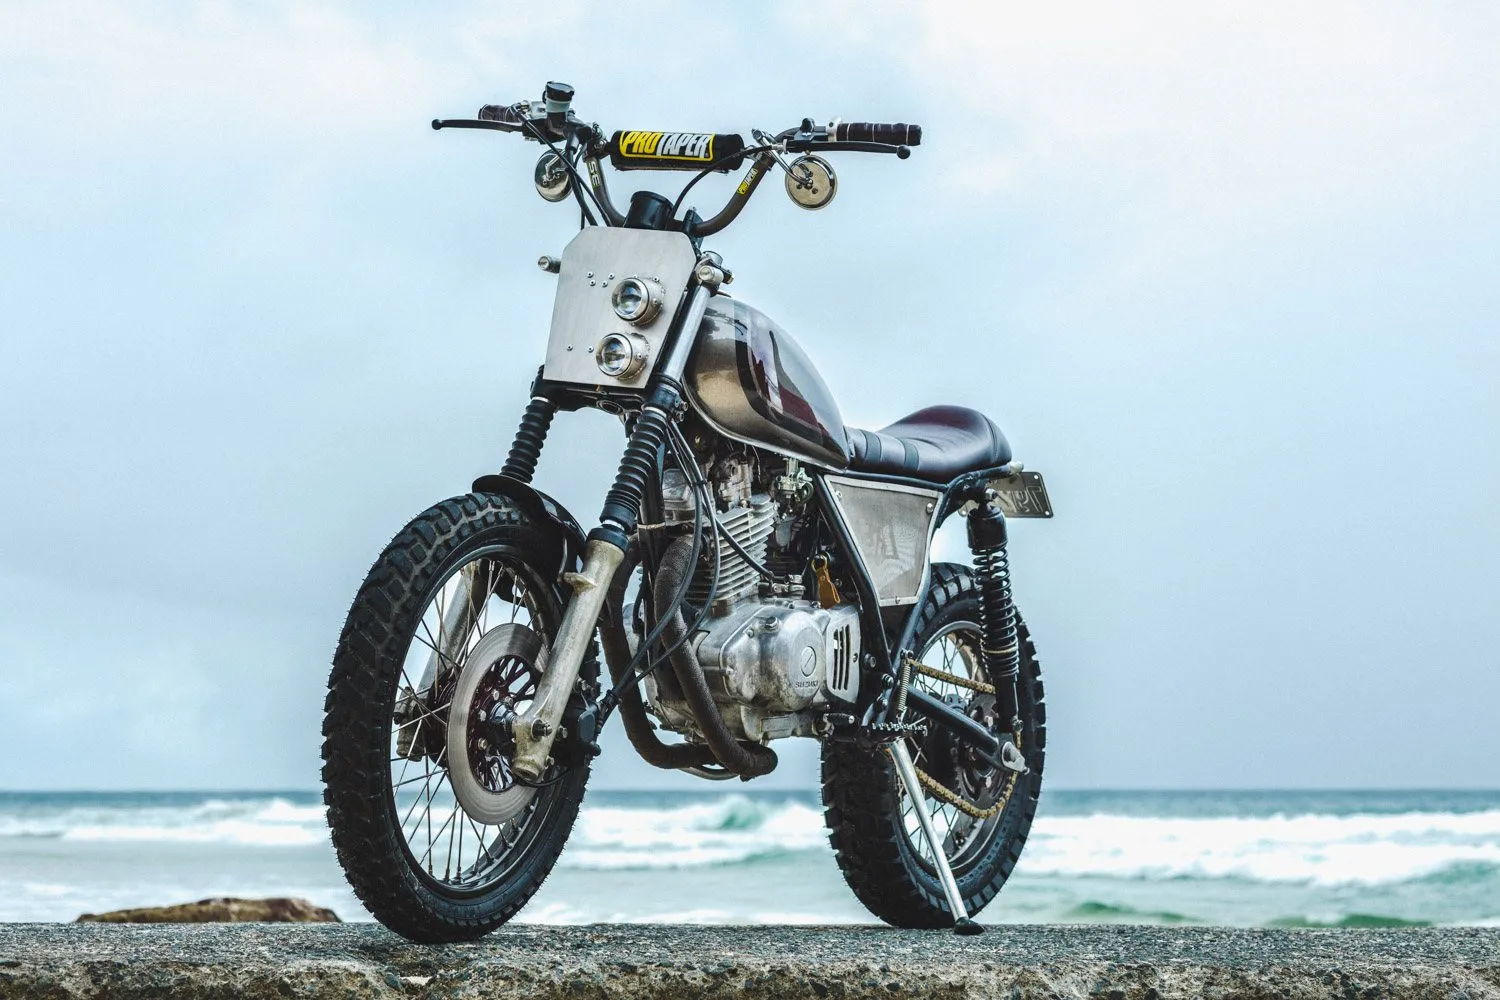 Nicks GN250 Scrambler 3 - Completing your project bike and getting it on the road